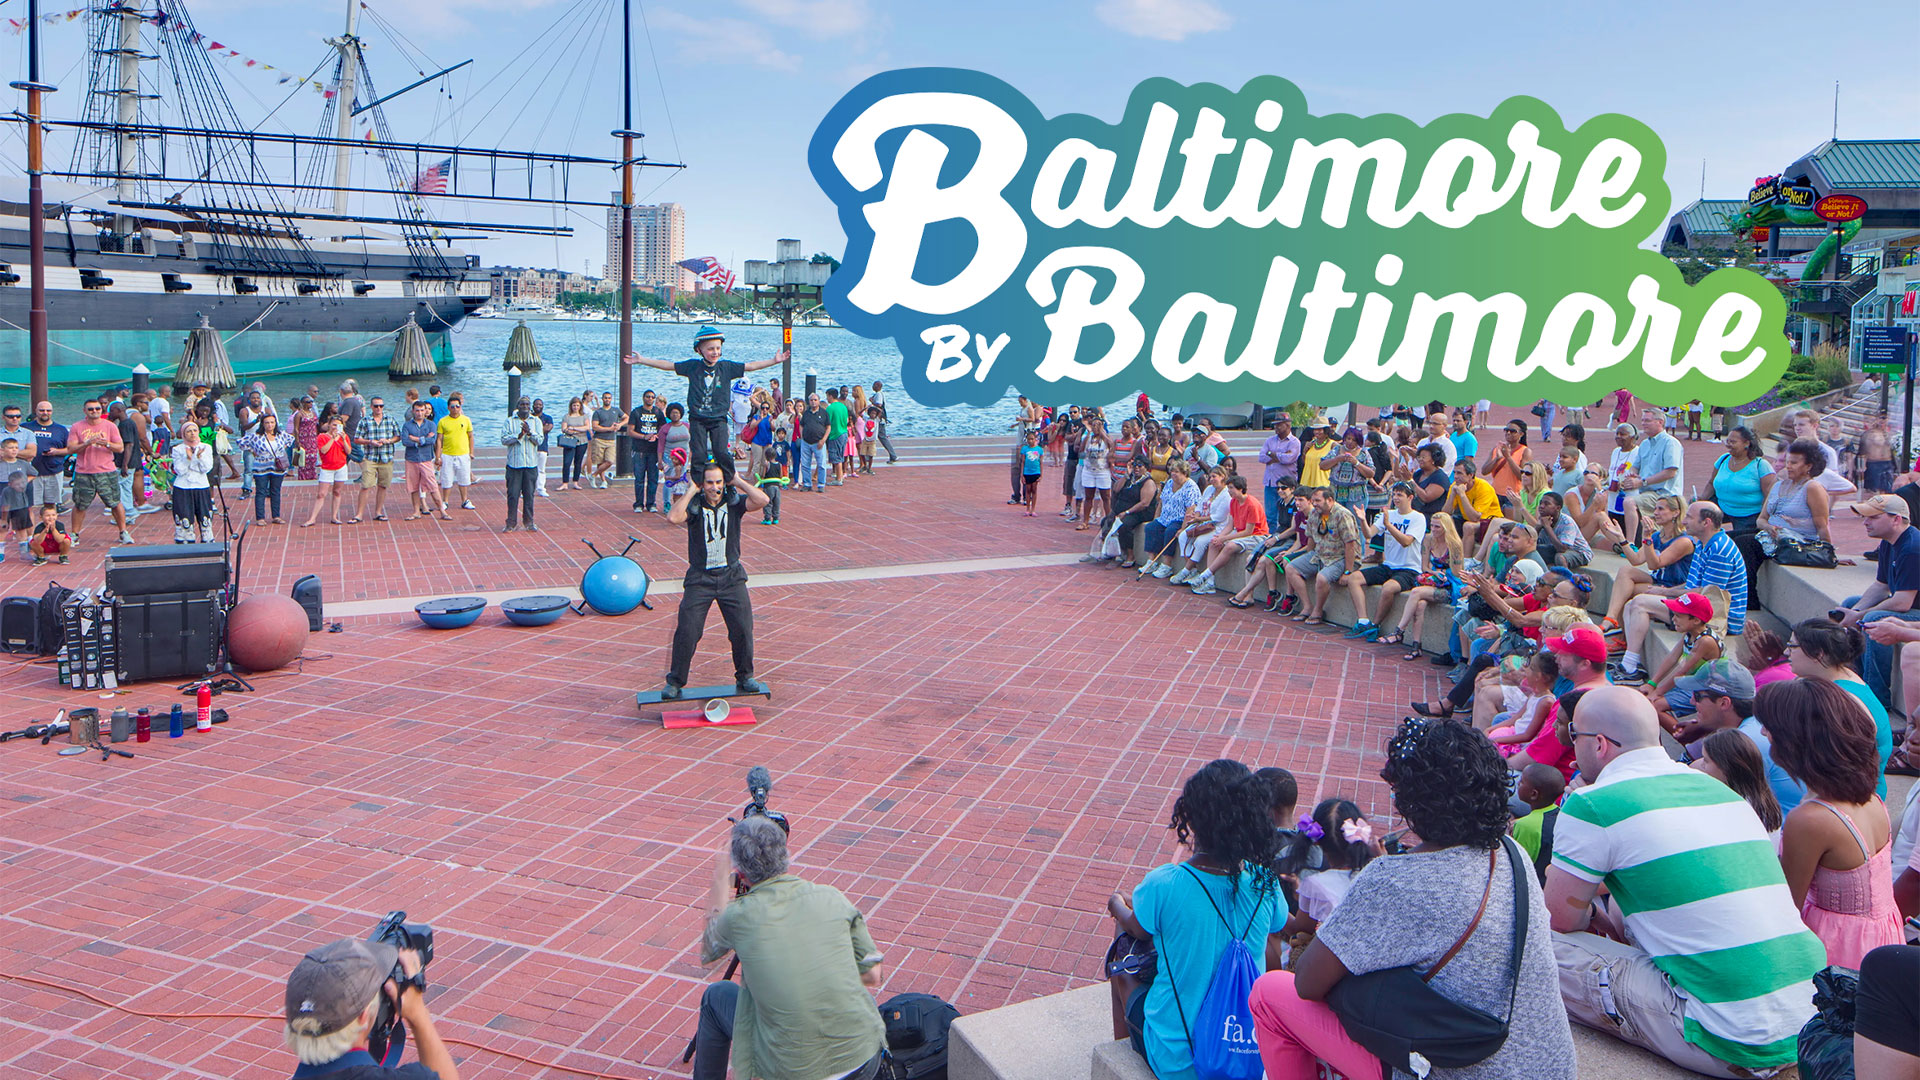 Baltimore by Baltimore makers and music festival by Waterfront Partnership